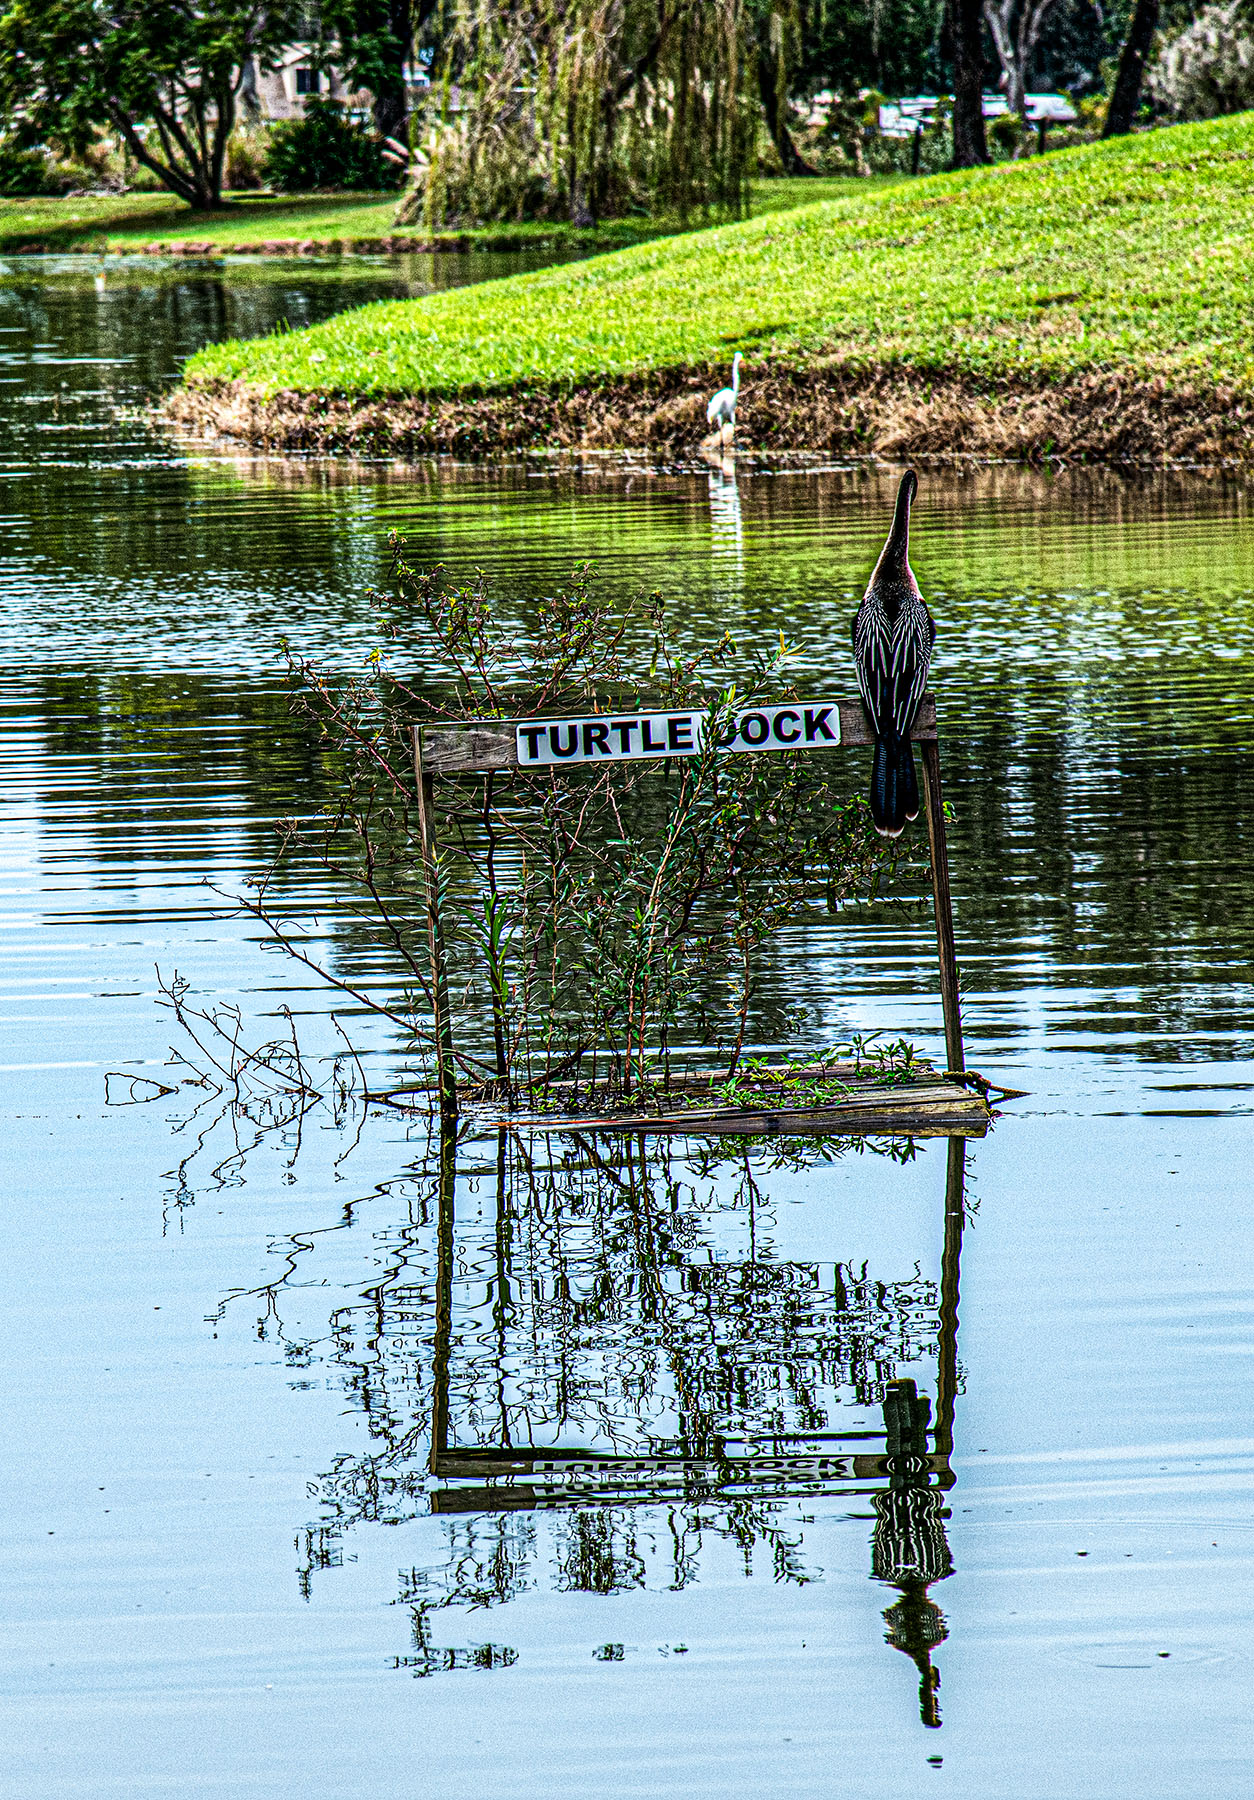 More-Turtle-Dock